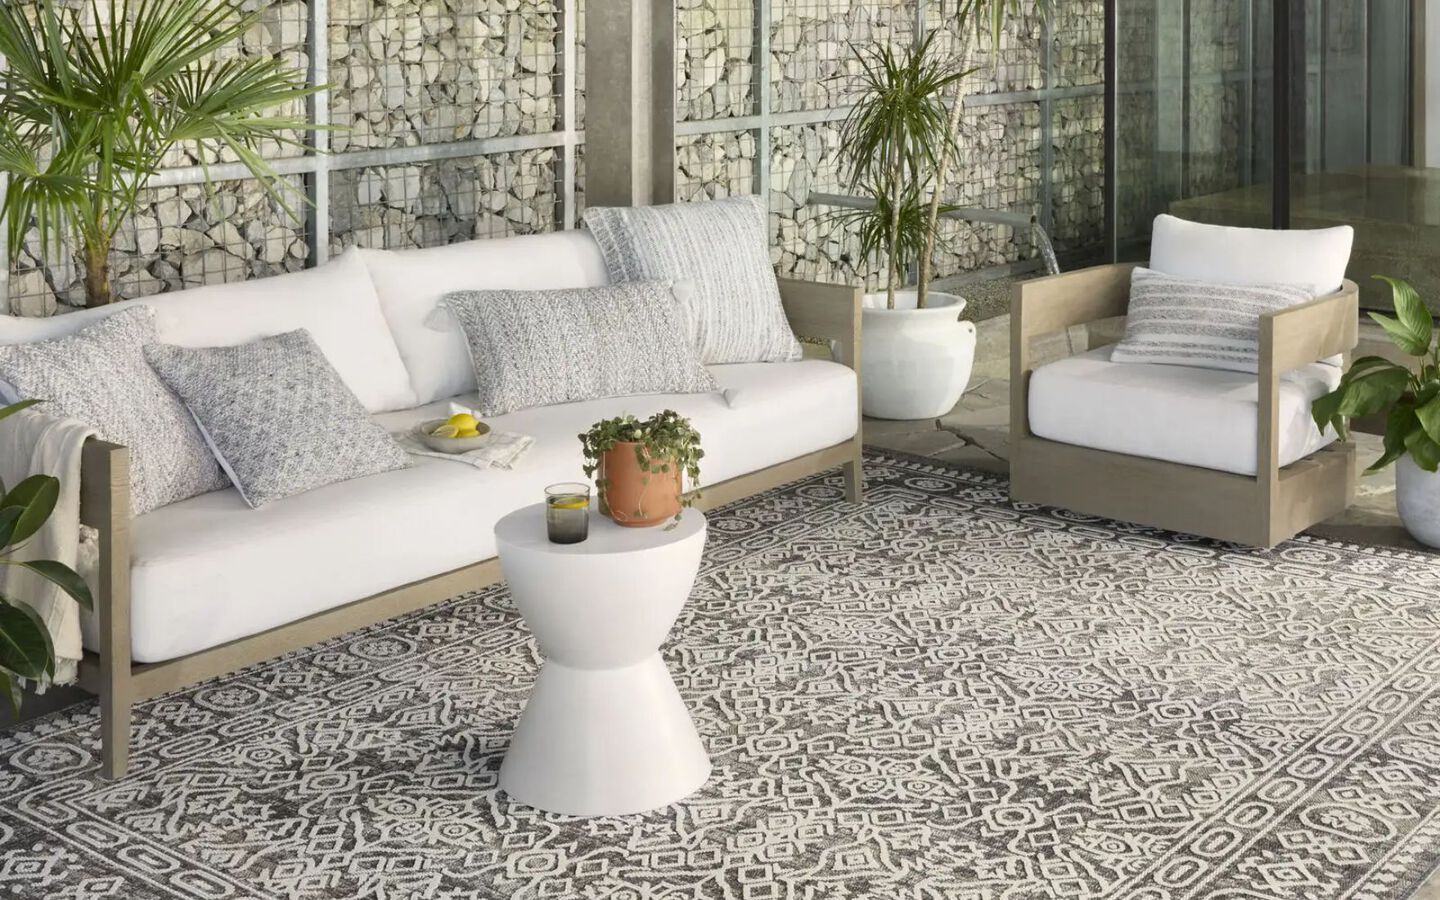 outdoor patio with white and light wooden furniture and a dark grey and white patterned rug